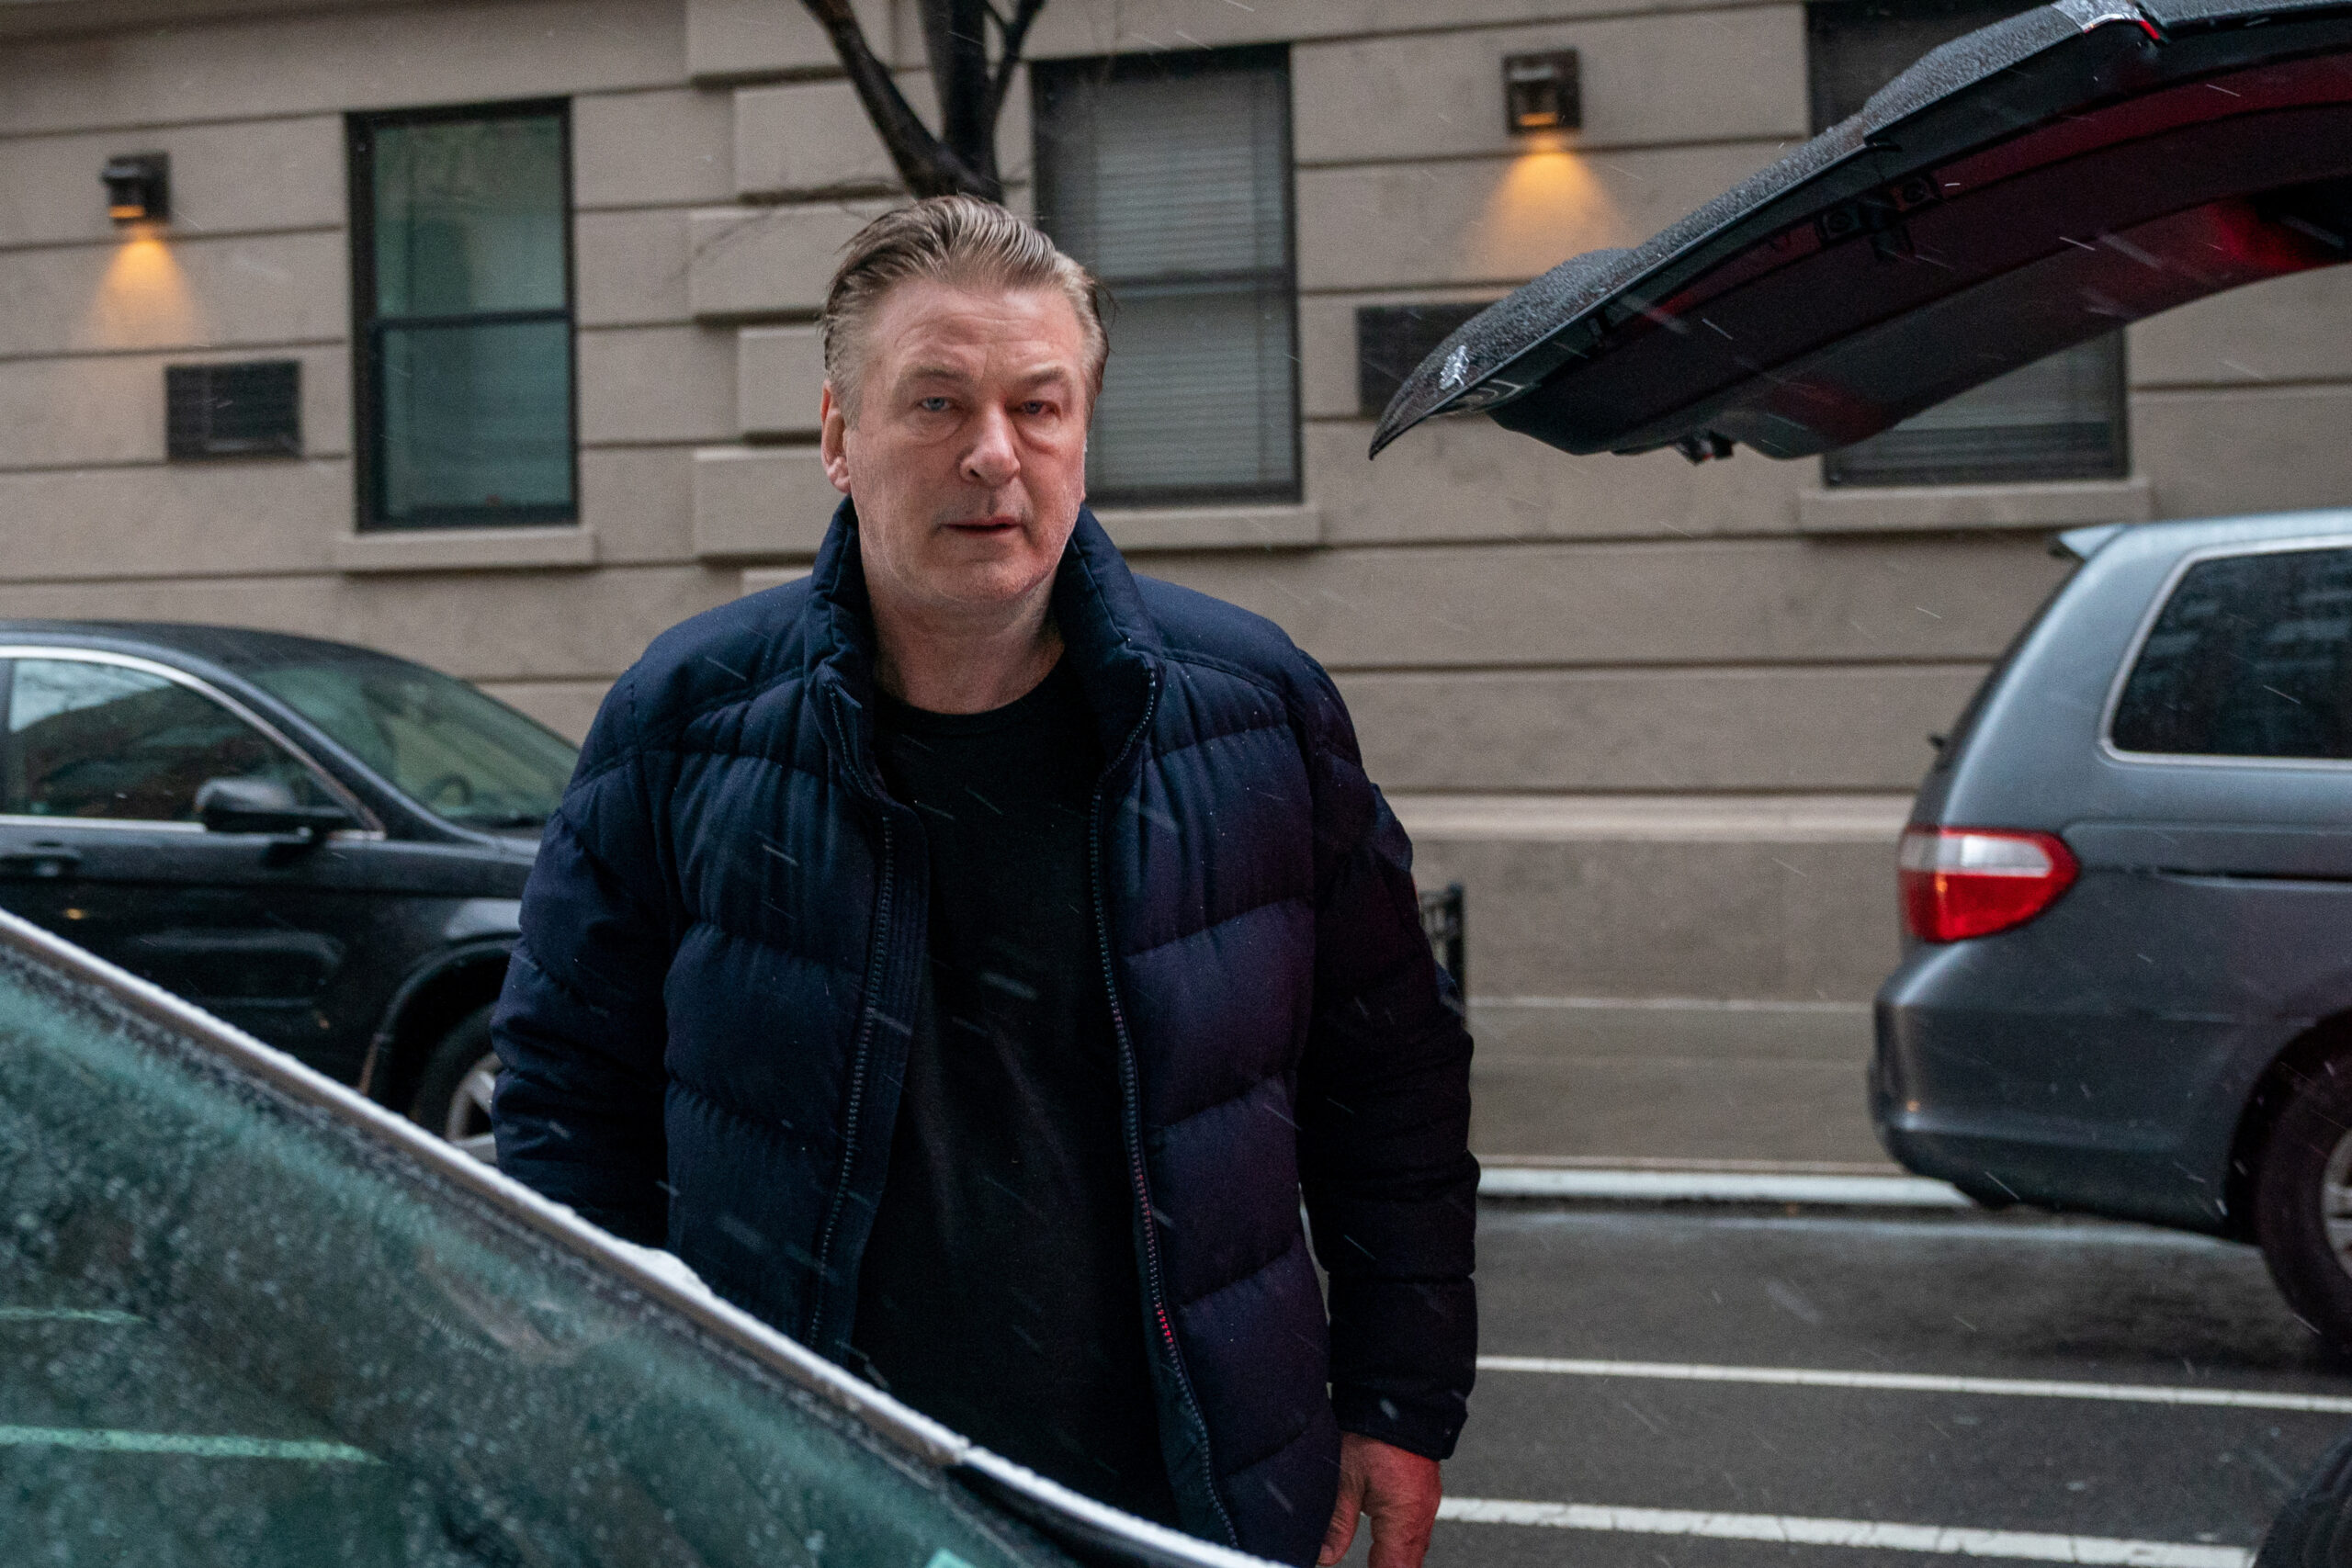 Alec Baldwin pleads not guilty to manslaughter charge in 'Rust' shooting